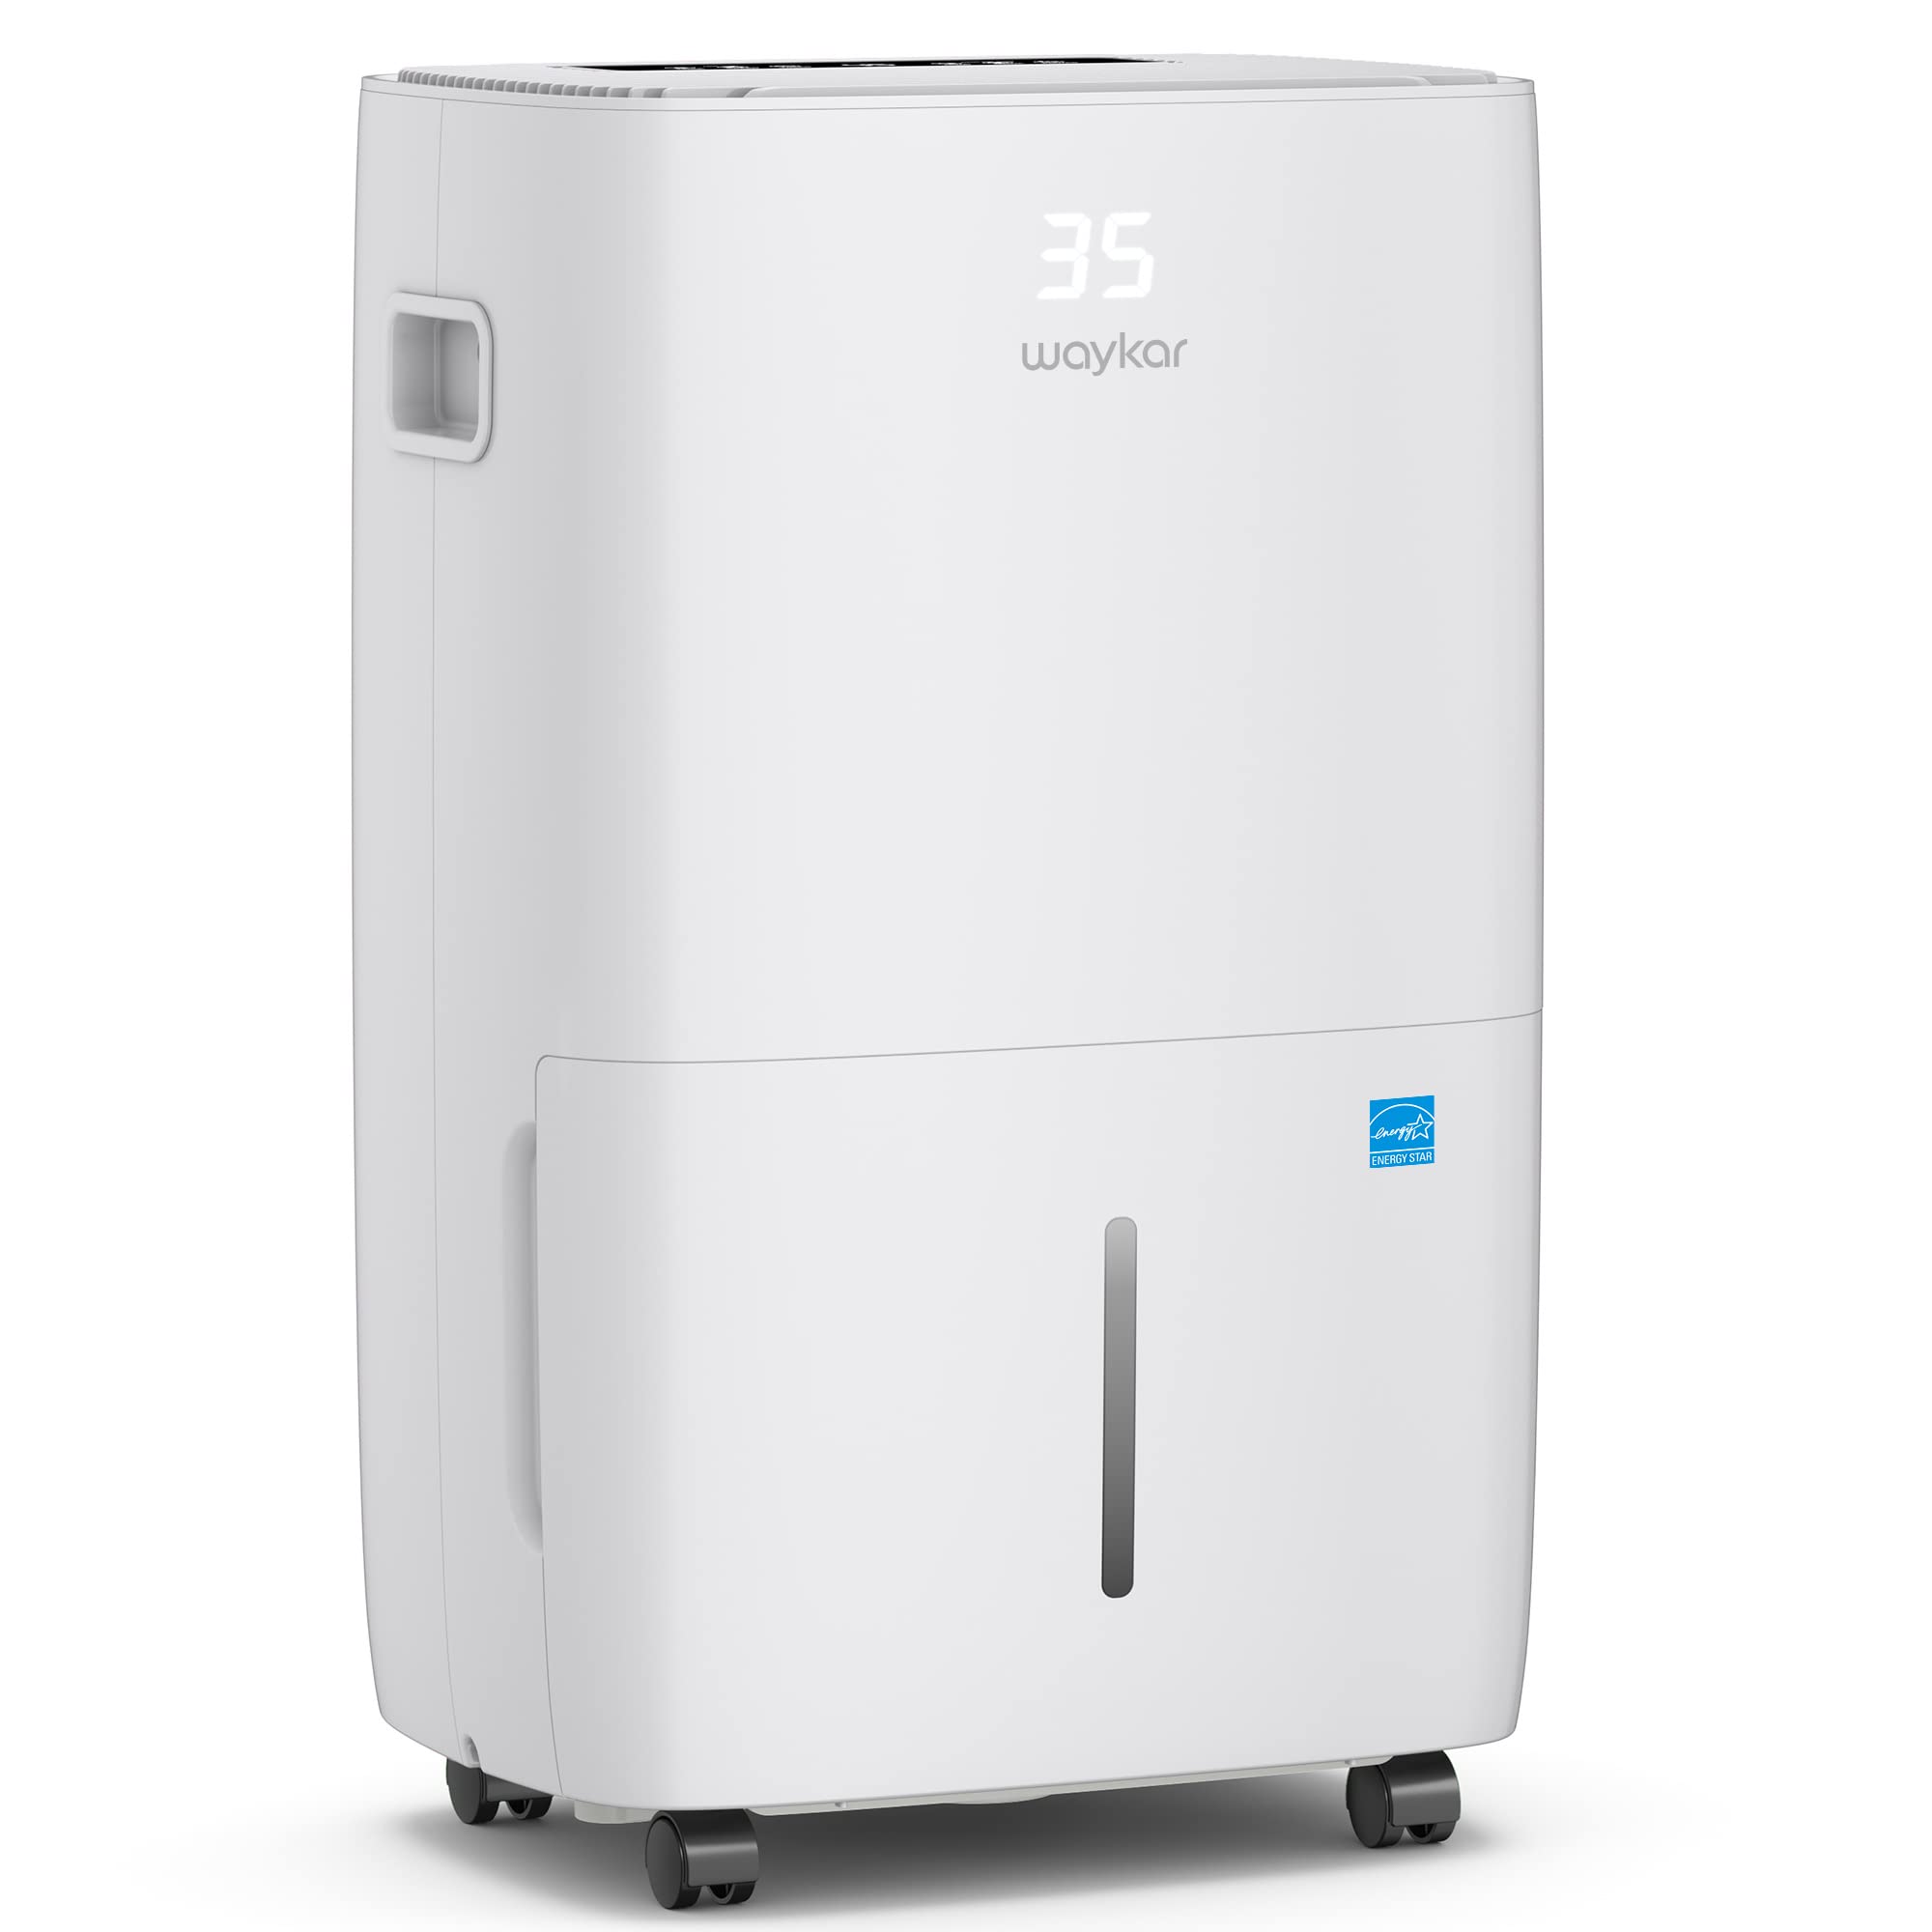 Waykar 130 Pints 6,500 Sq. Ft Energy Star Dehumidifier with Drain Hose for Commercial and Industrial Large Rooms, Warehouses, Storages, Home, Basements and Bedroom with 2.04 Gal Water Tank